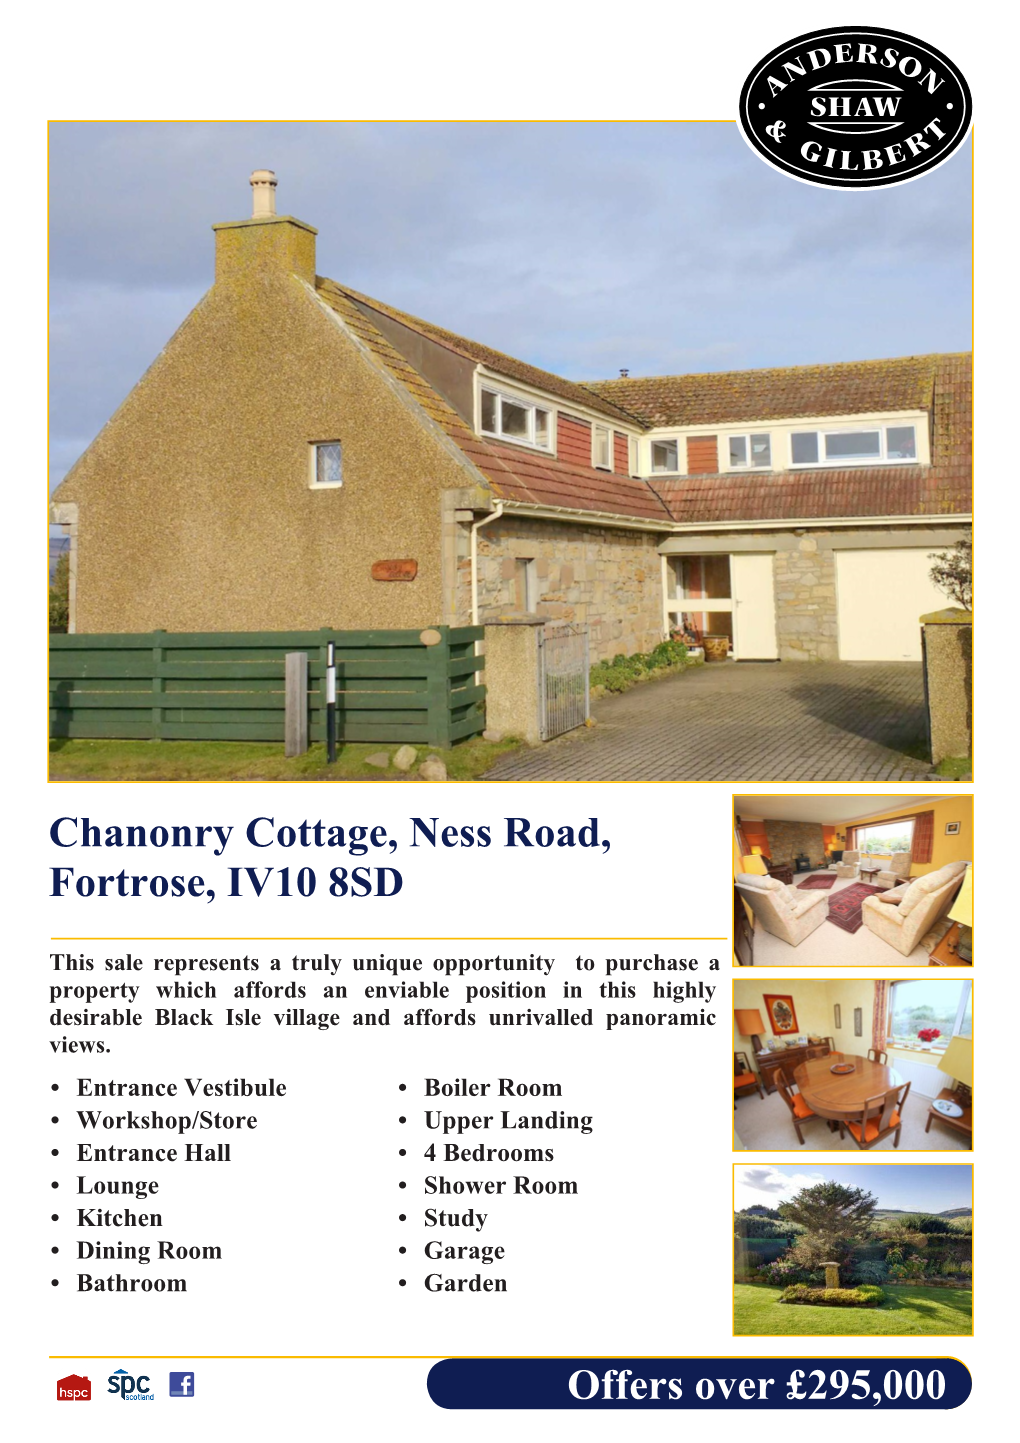 Chanonry Cottage, Ness Road, Fortrose, IV10 8SD